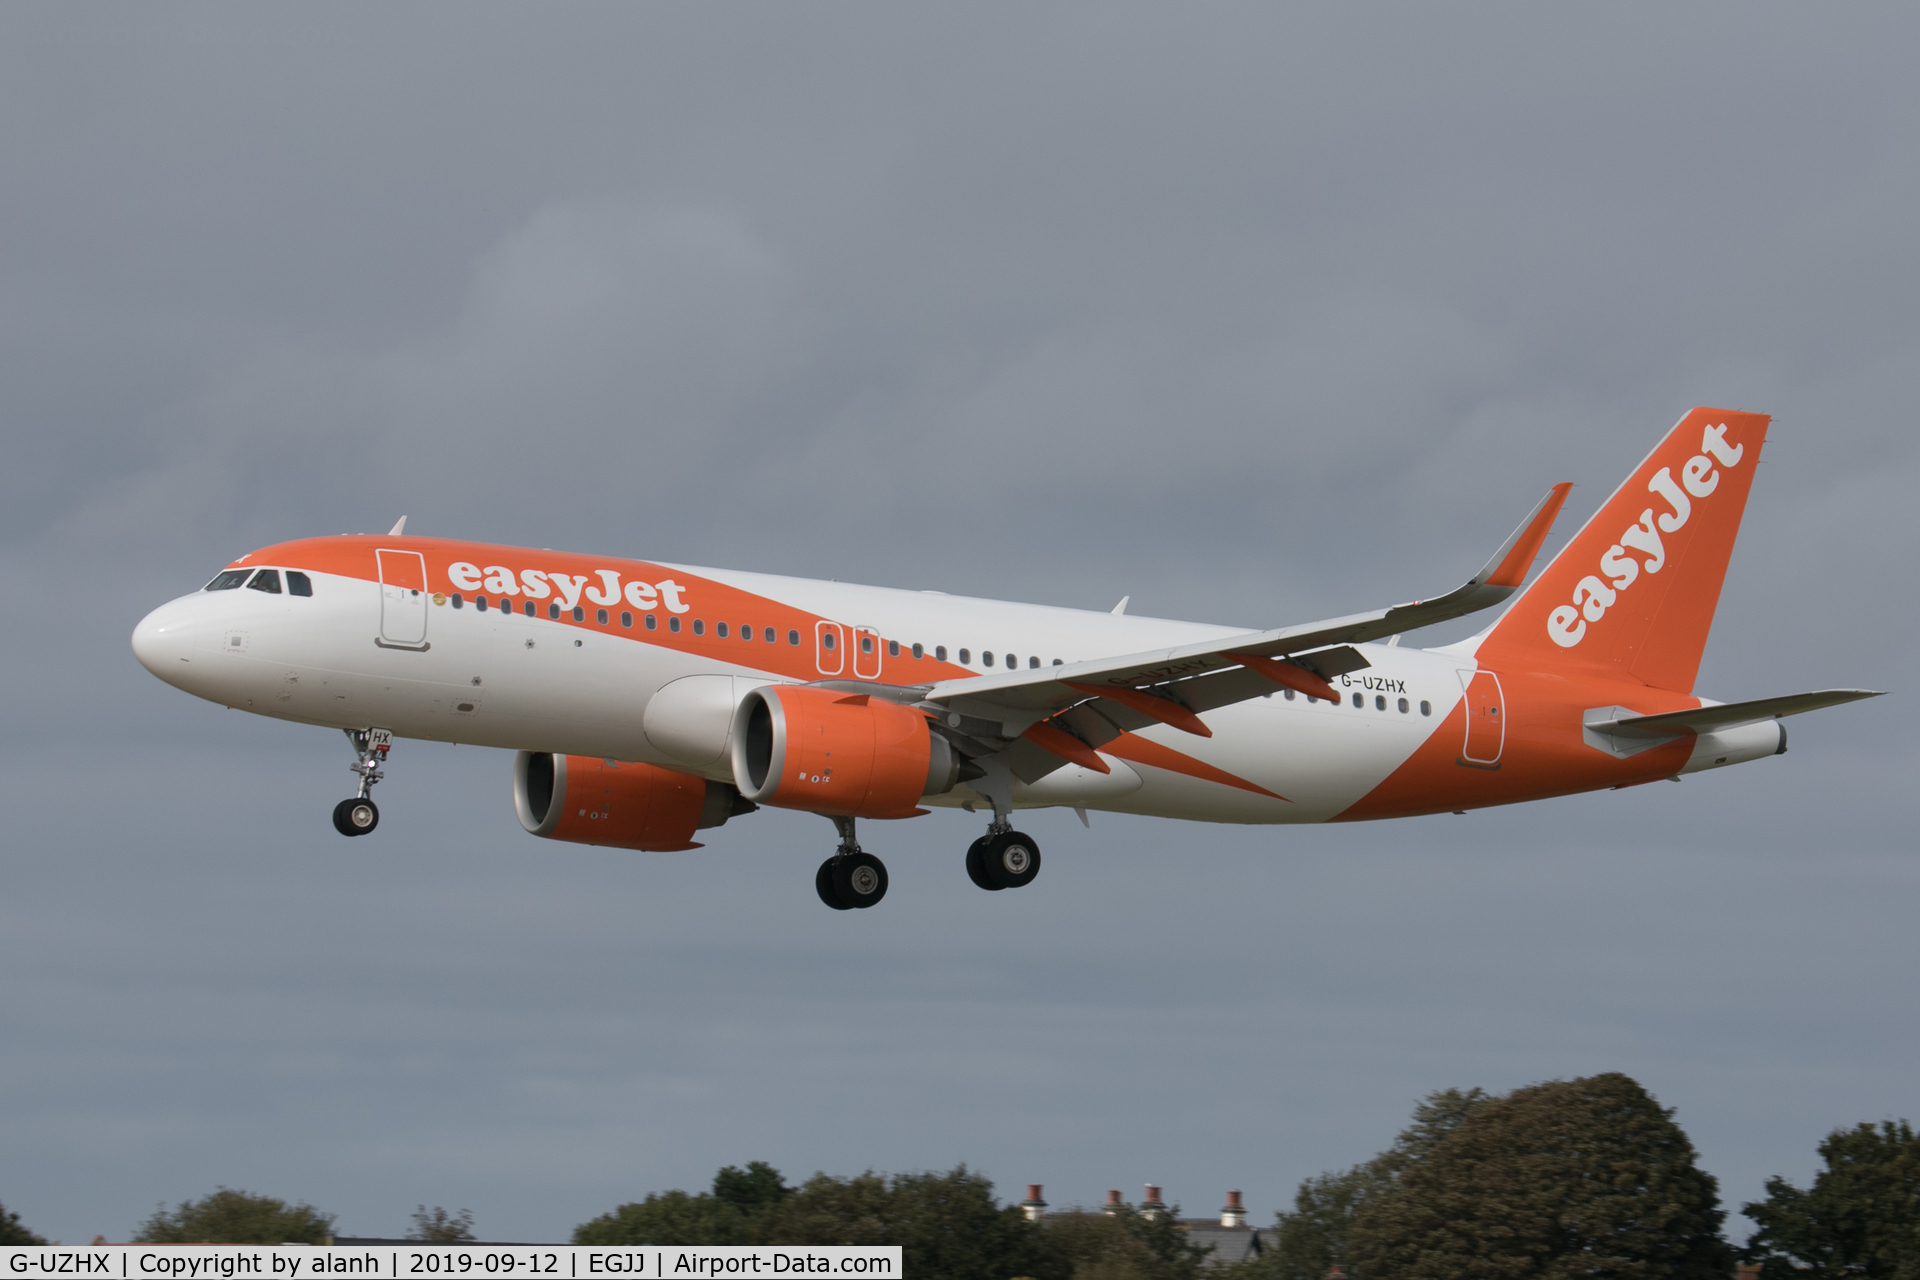 G-UZHX, 2018 Airbus A320-251N C/N 8880, Arriving at Jersey, CI